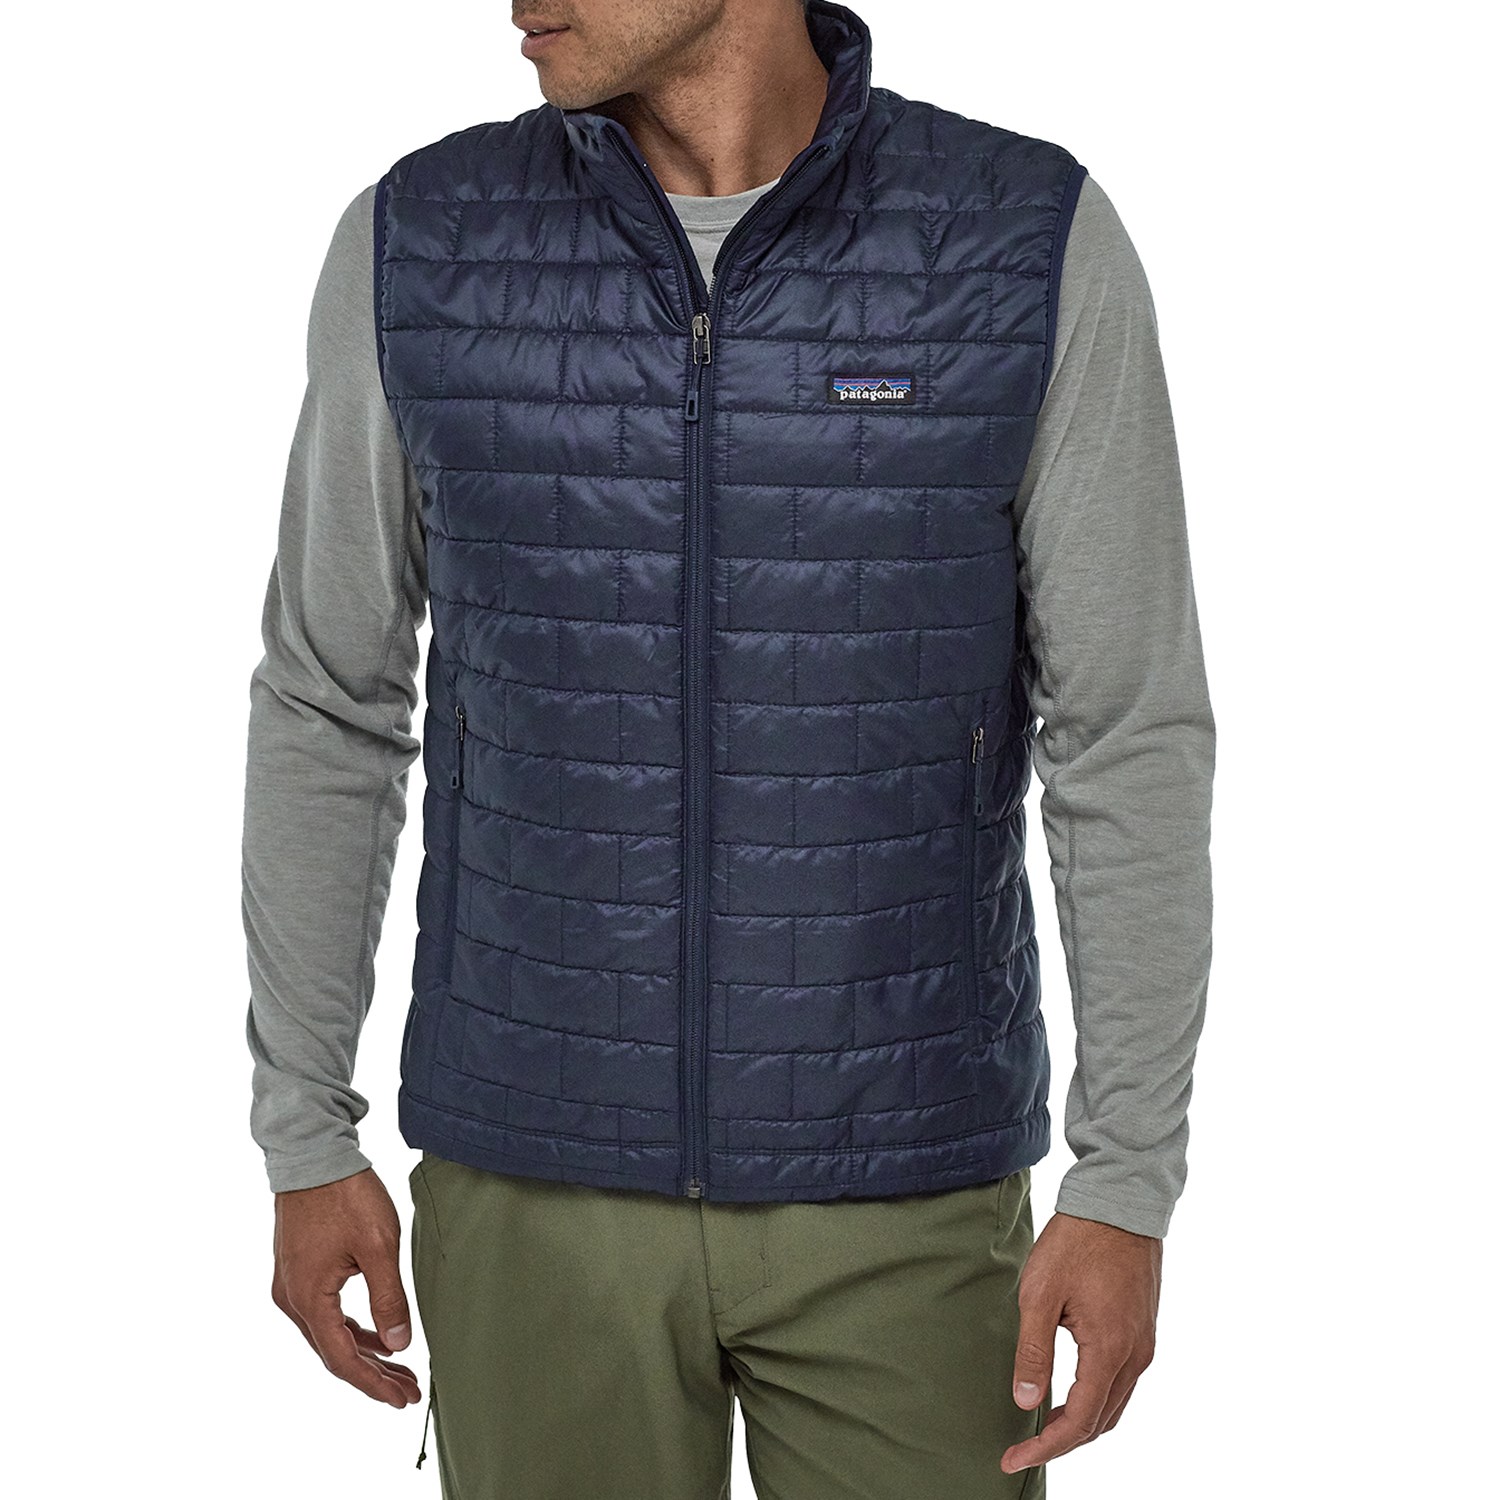 Patagonia Nano Puff Insulated Vest | vlr.eng.br